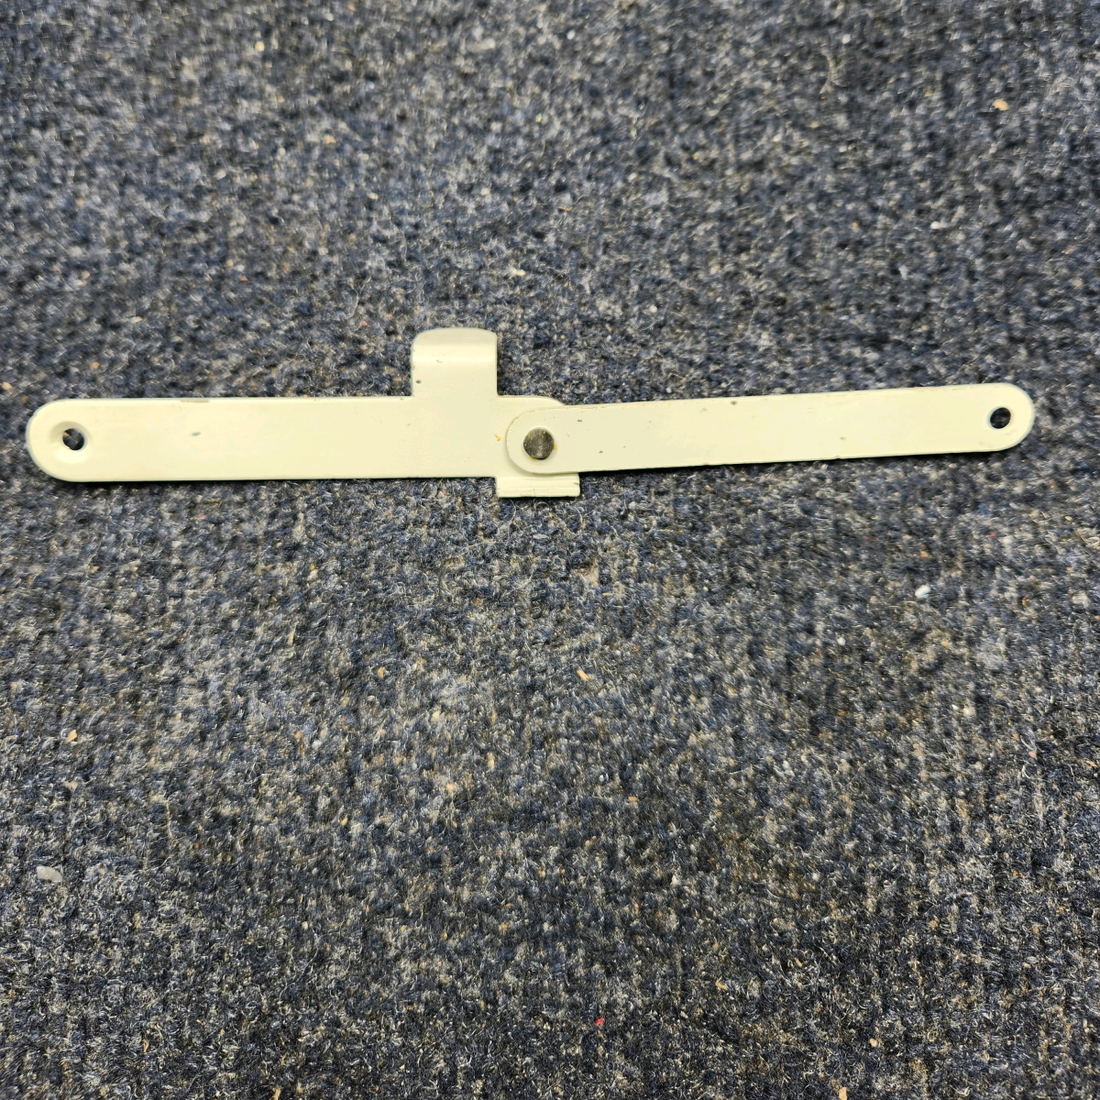 Used aircraft parts for sale, 913020-002 Texas Several MOONEY ARM ASSY BAGGAGE DOOR OPEN PRICE PER EACH